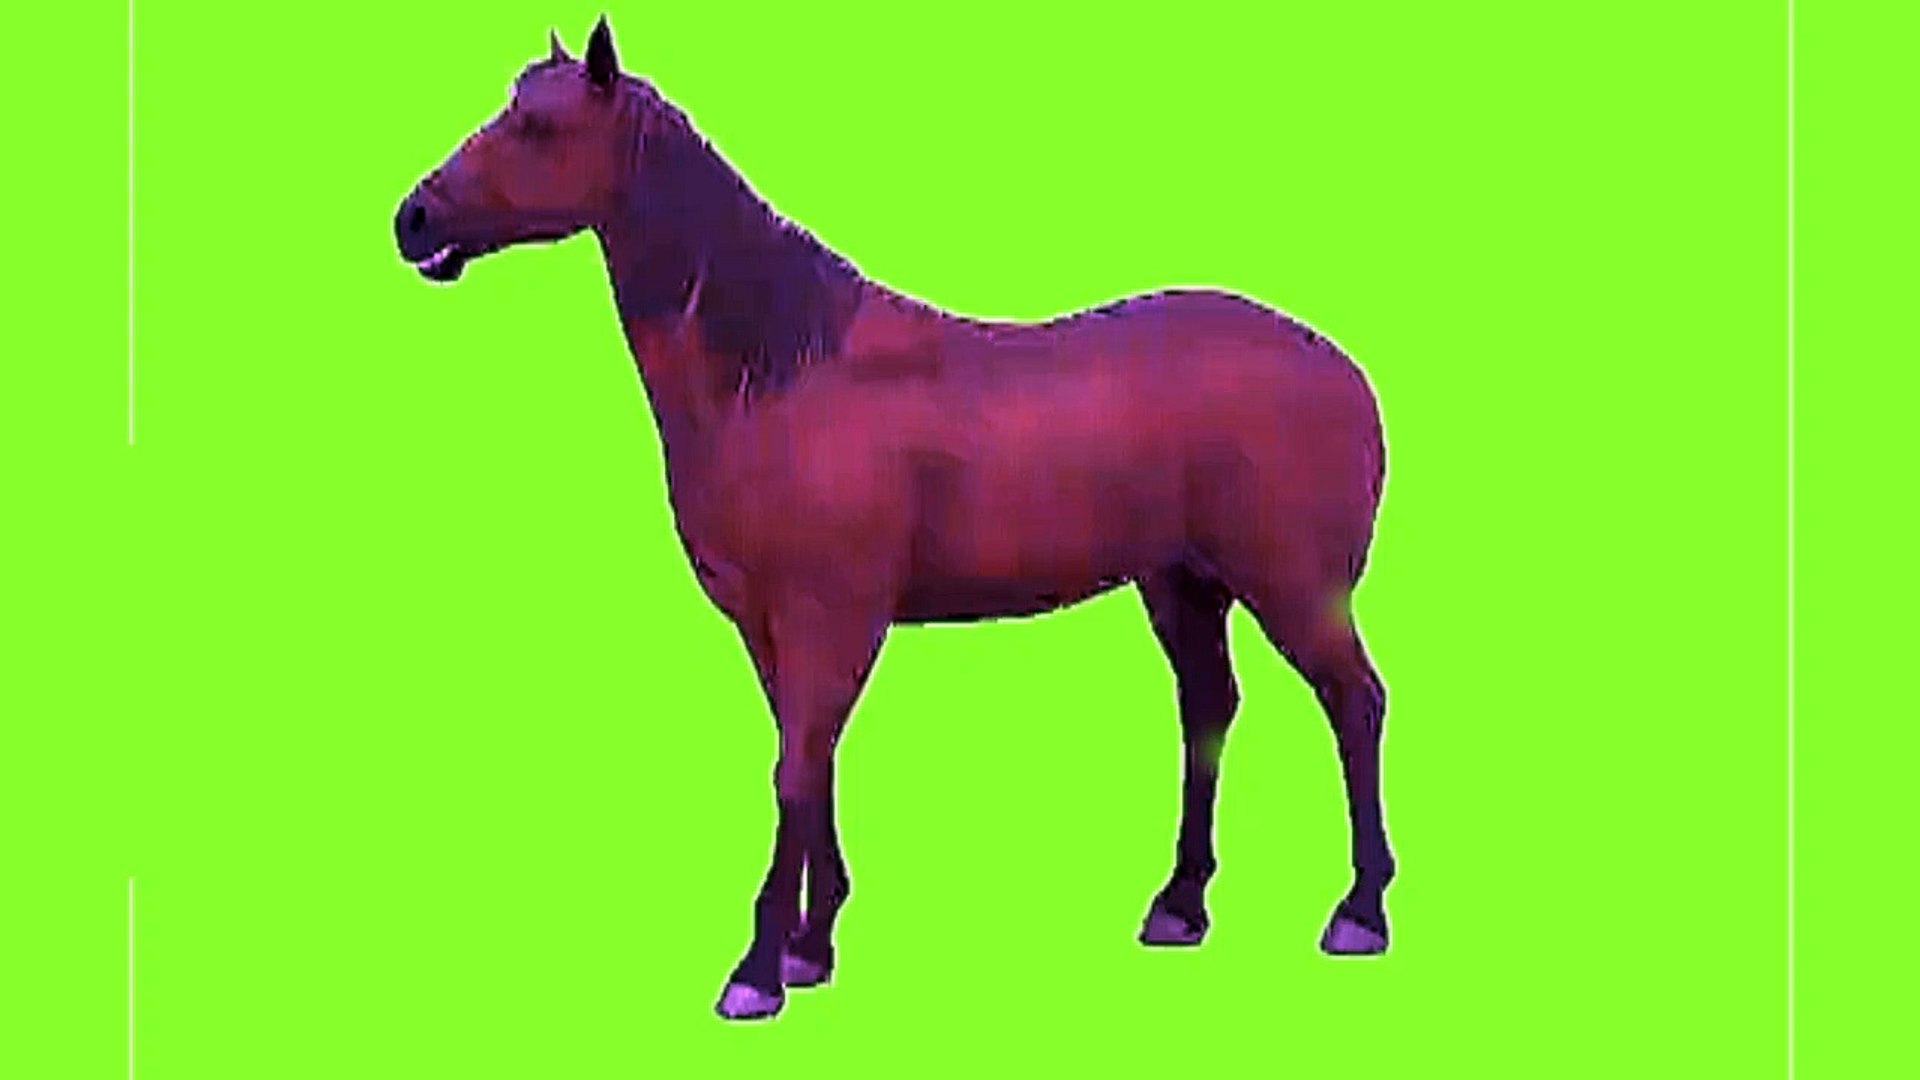 Animated horse green screen background horse green screen video standing animated horse green screen horse